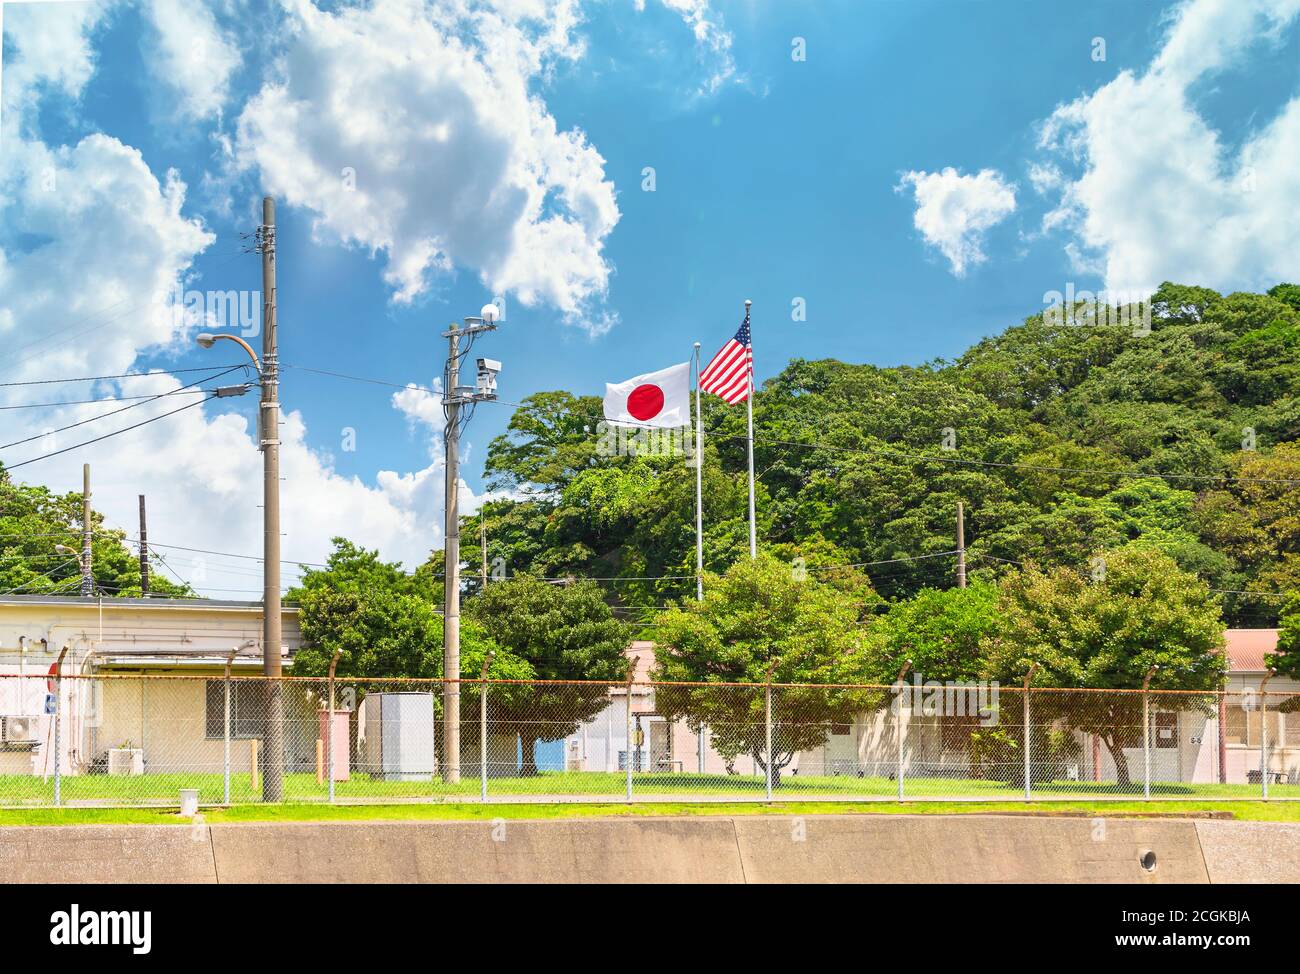 yokosuka, japan - july 19 2020: National flags of Japan and United States of America on the Azuma Island separating the Japan Self Defence Fleet from Stock Photo